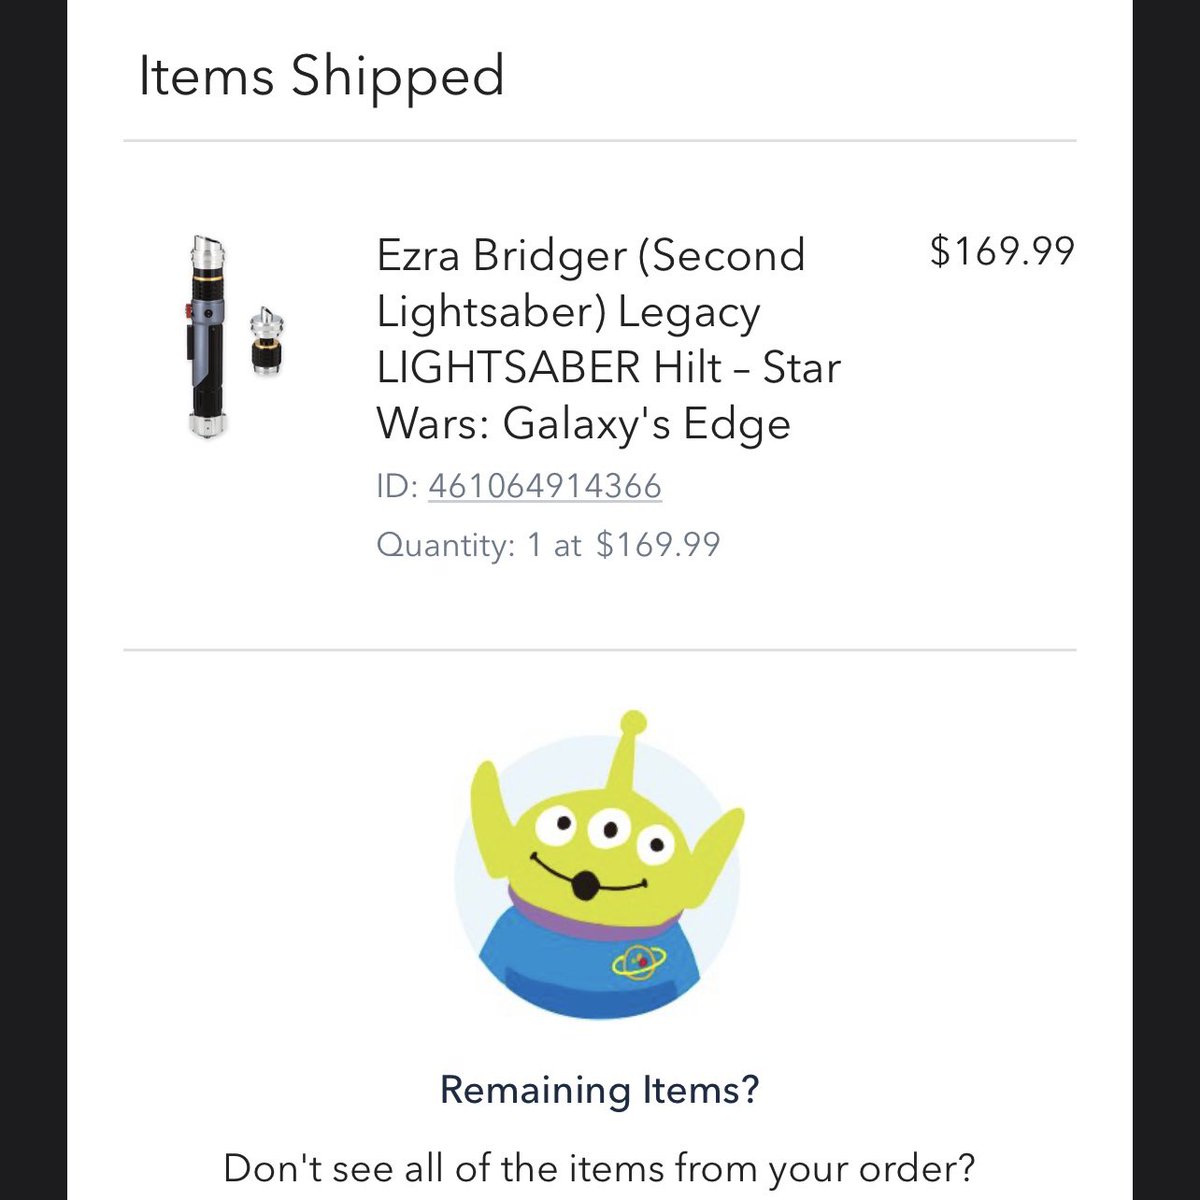 My Legacy Ezra Bridger lightsaber hilt shipped yesterday while I was on the road. Now if they would just list the one from the Halcyon… #starwars #disney #shopdisney #lightsaber #maytheforcebewithyou #rebels #ezrabridger